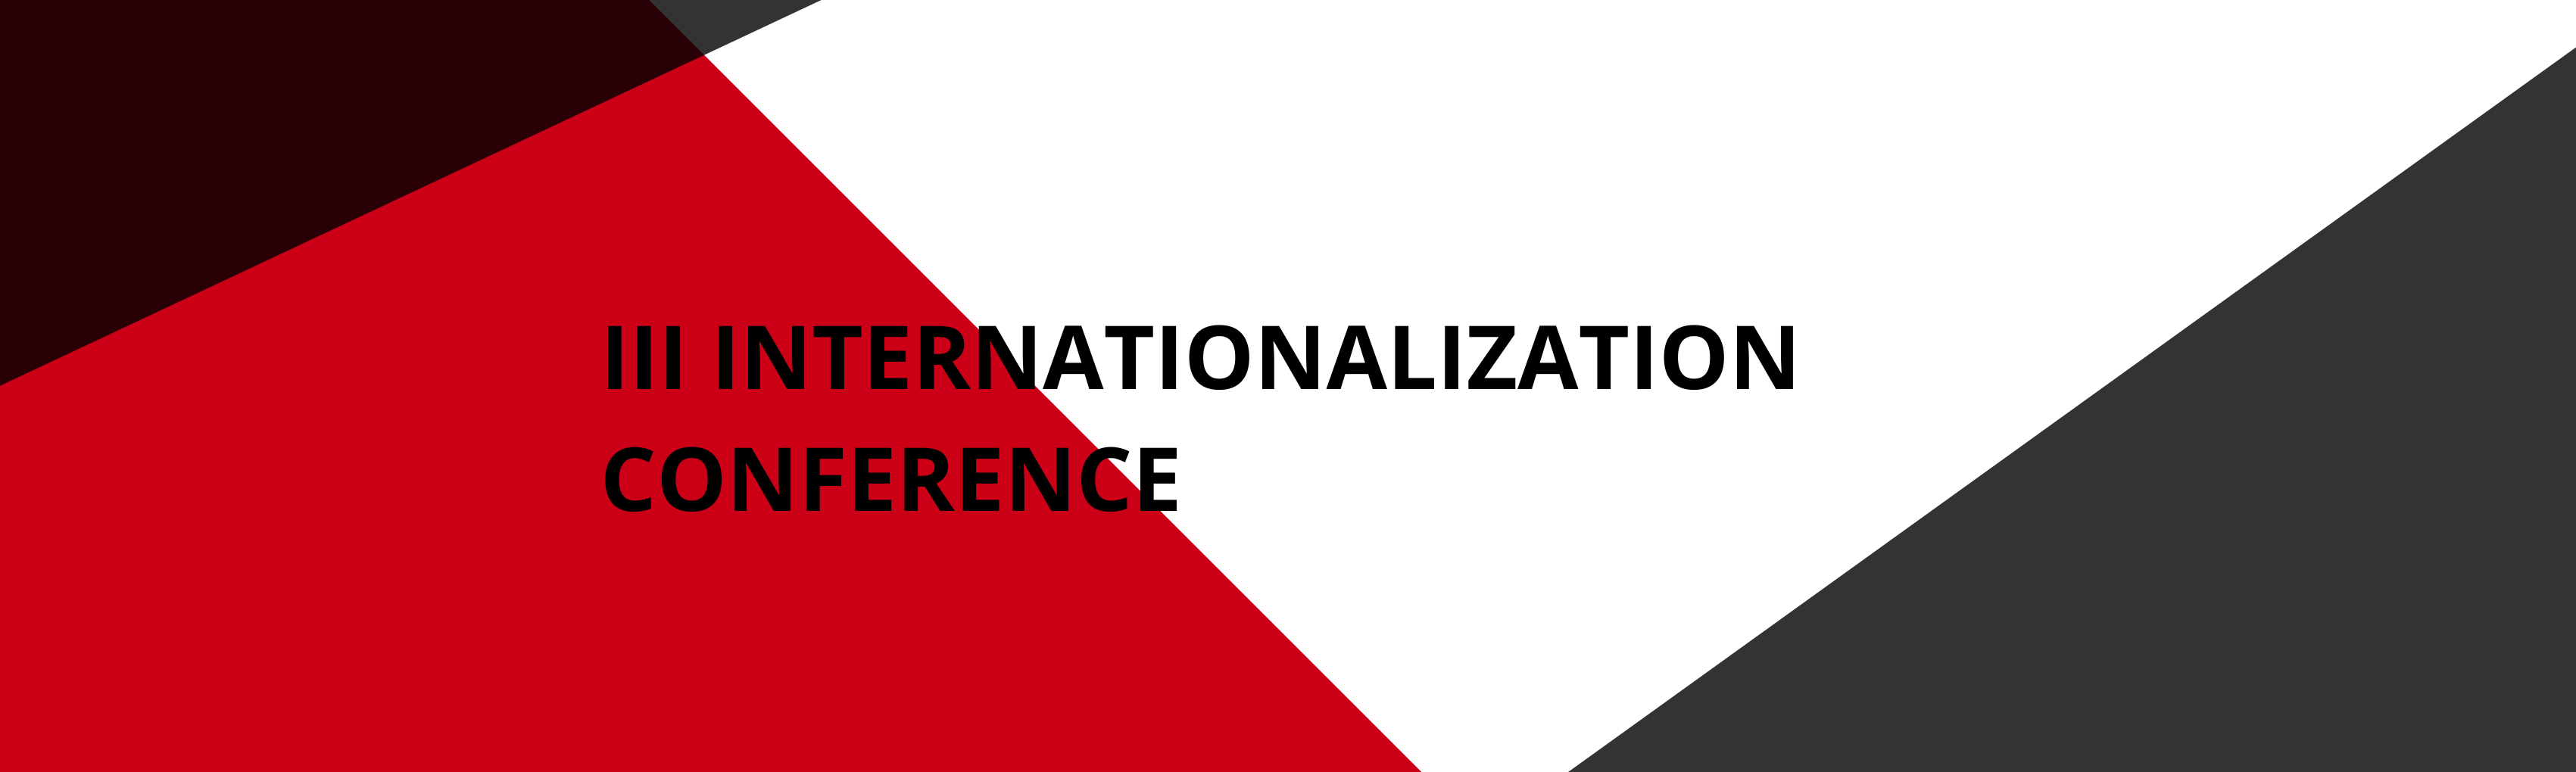 Cover III Internationalization conference